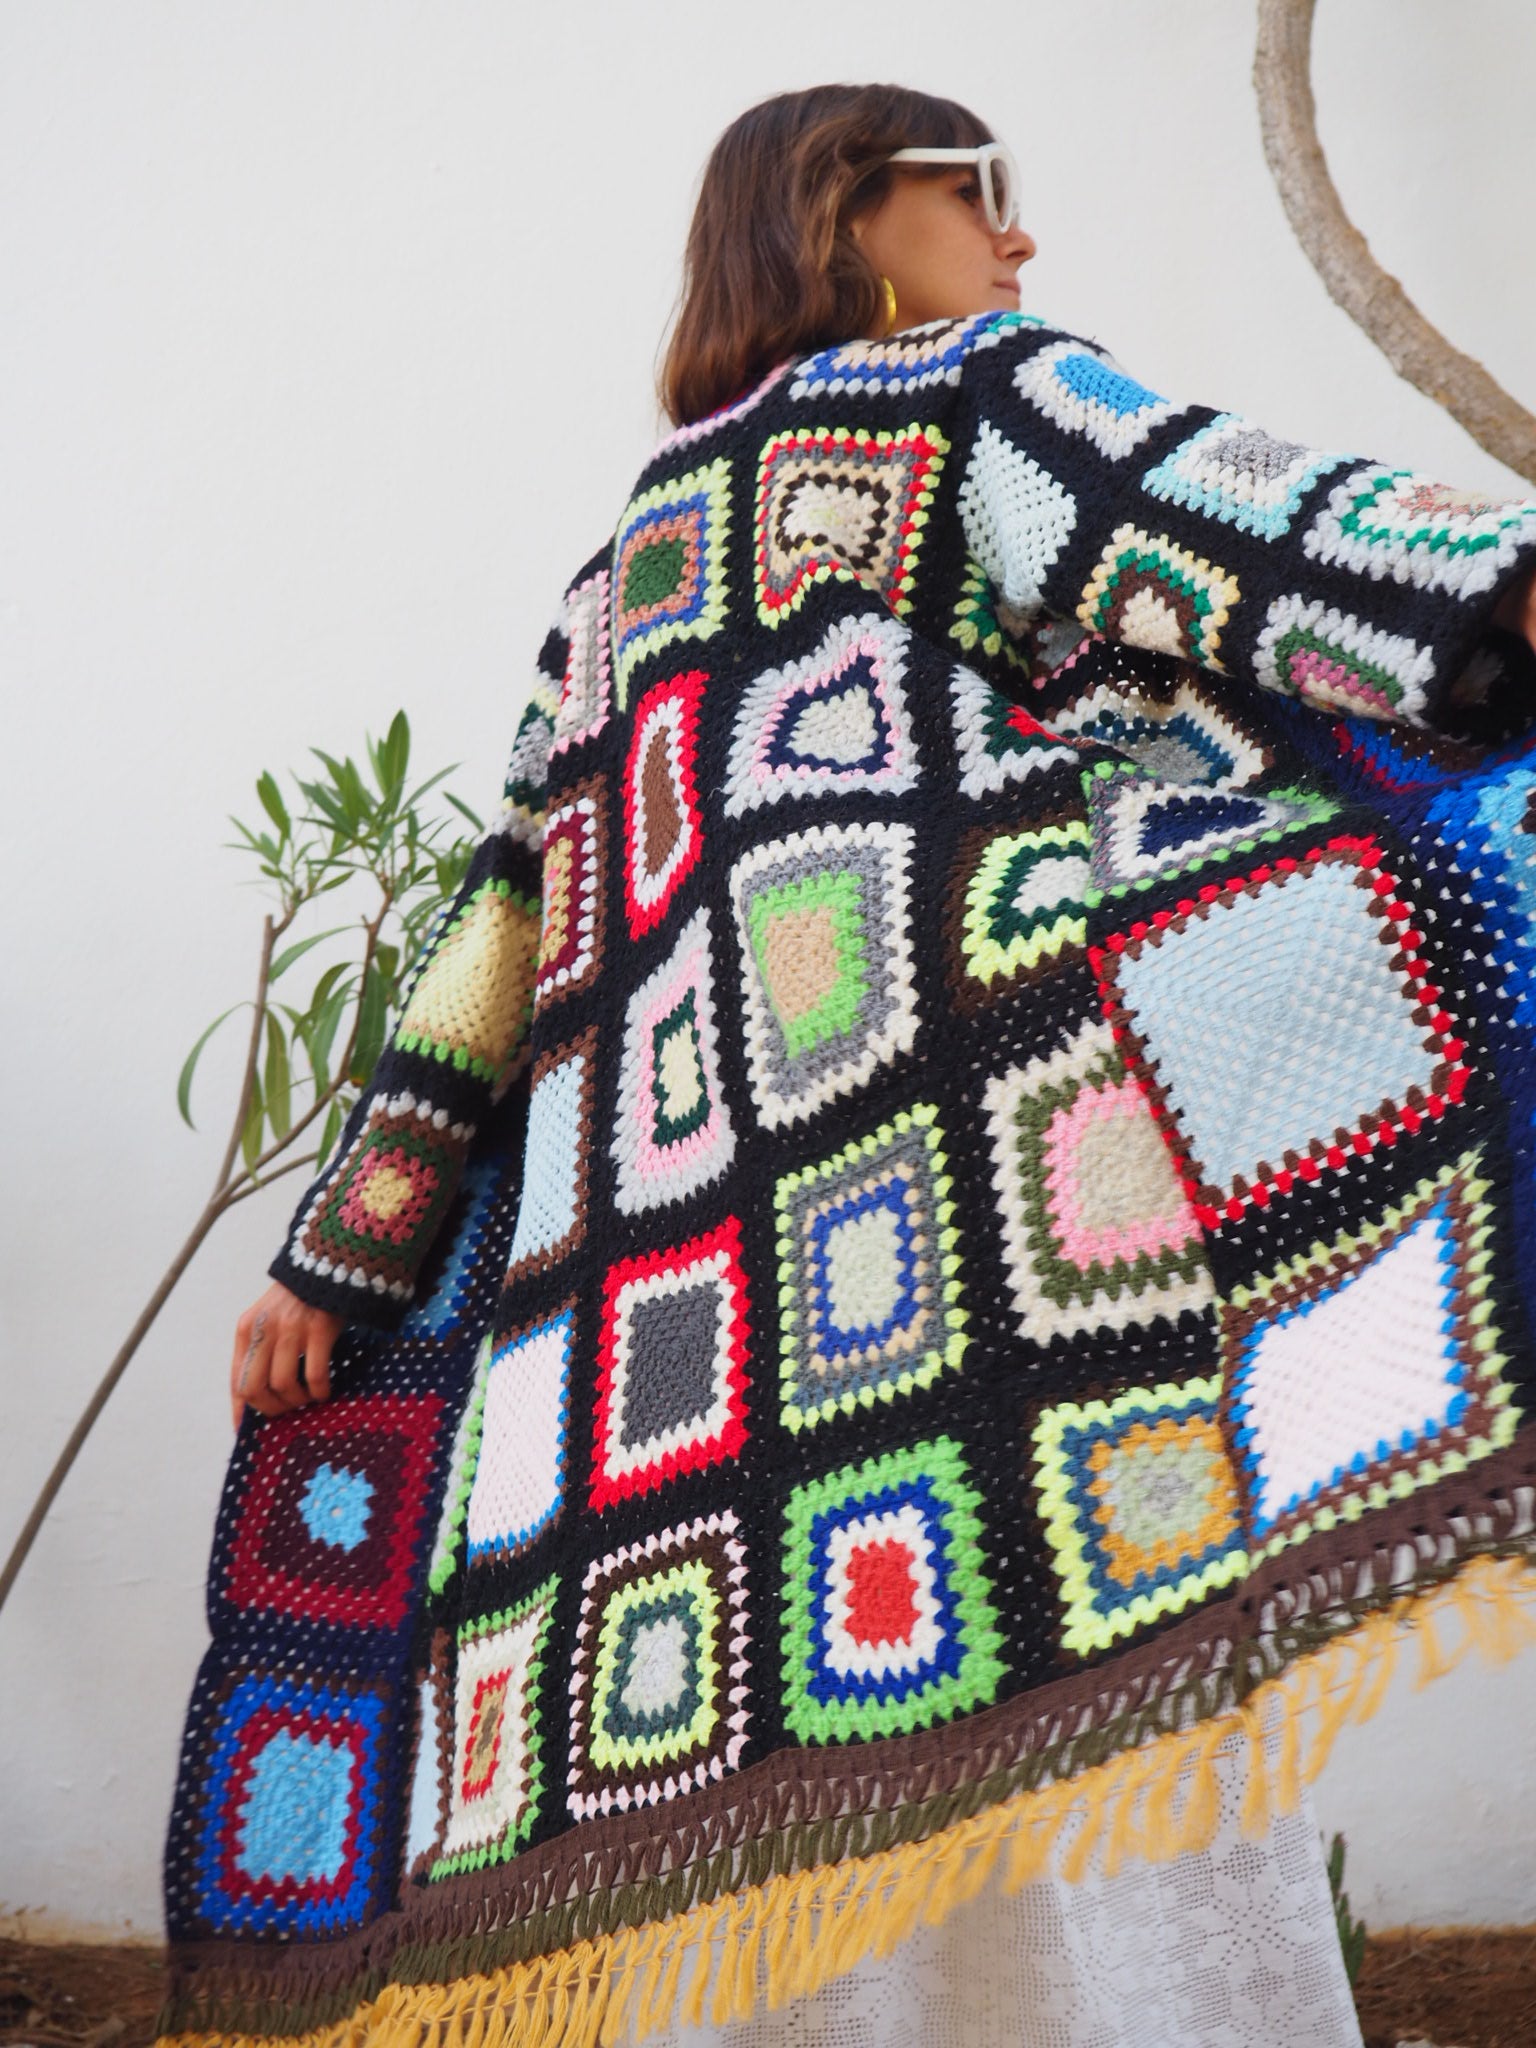 Vintage 1970’s Granny Square Crochet Up-cycled Jacket